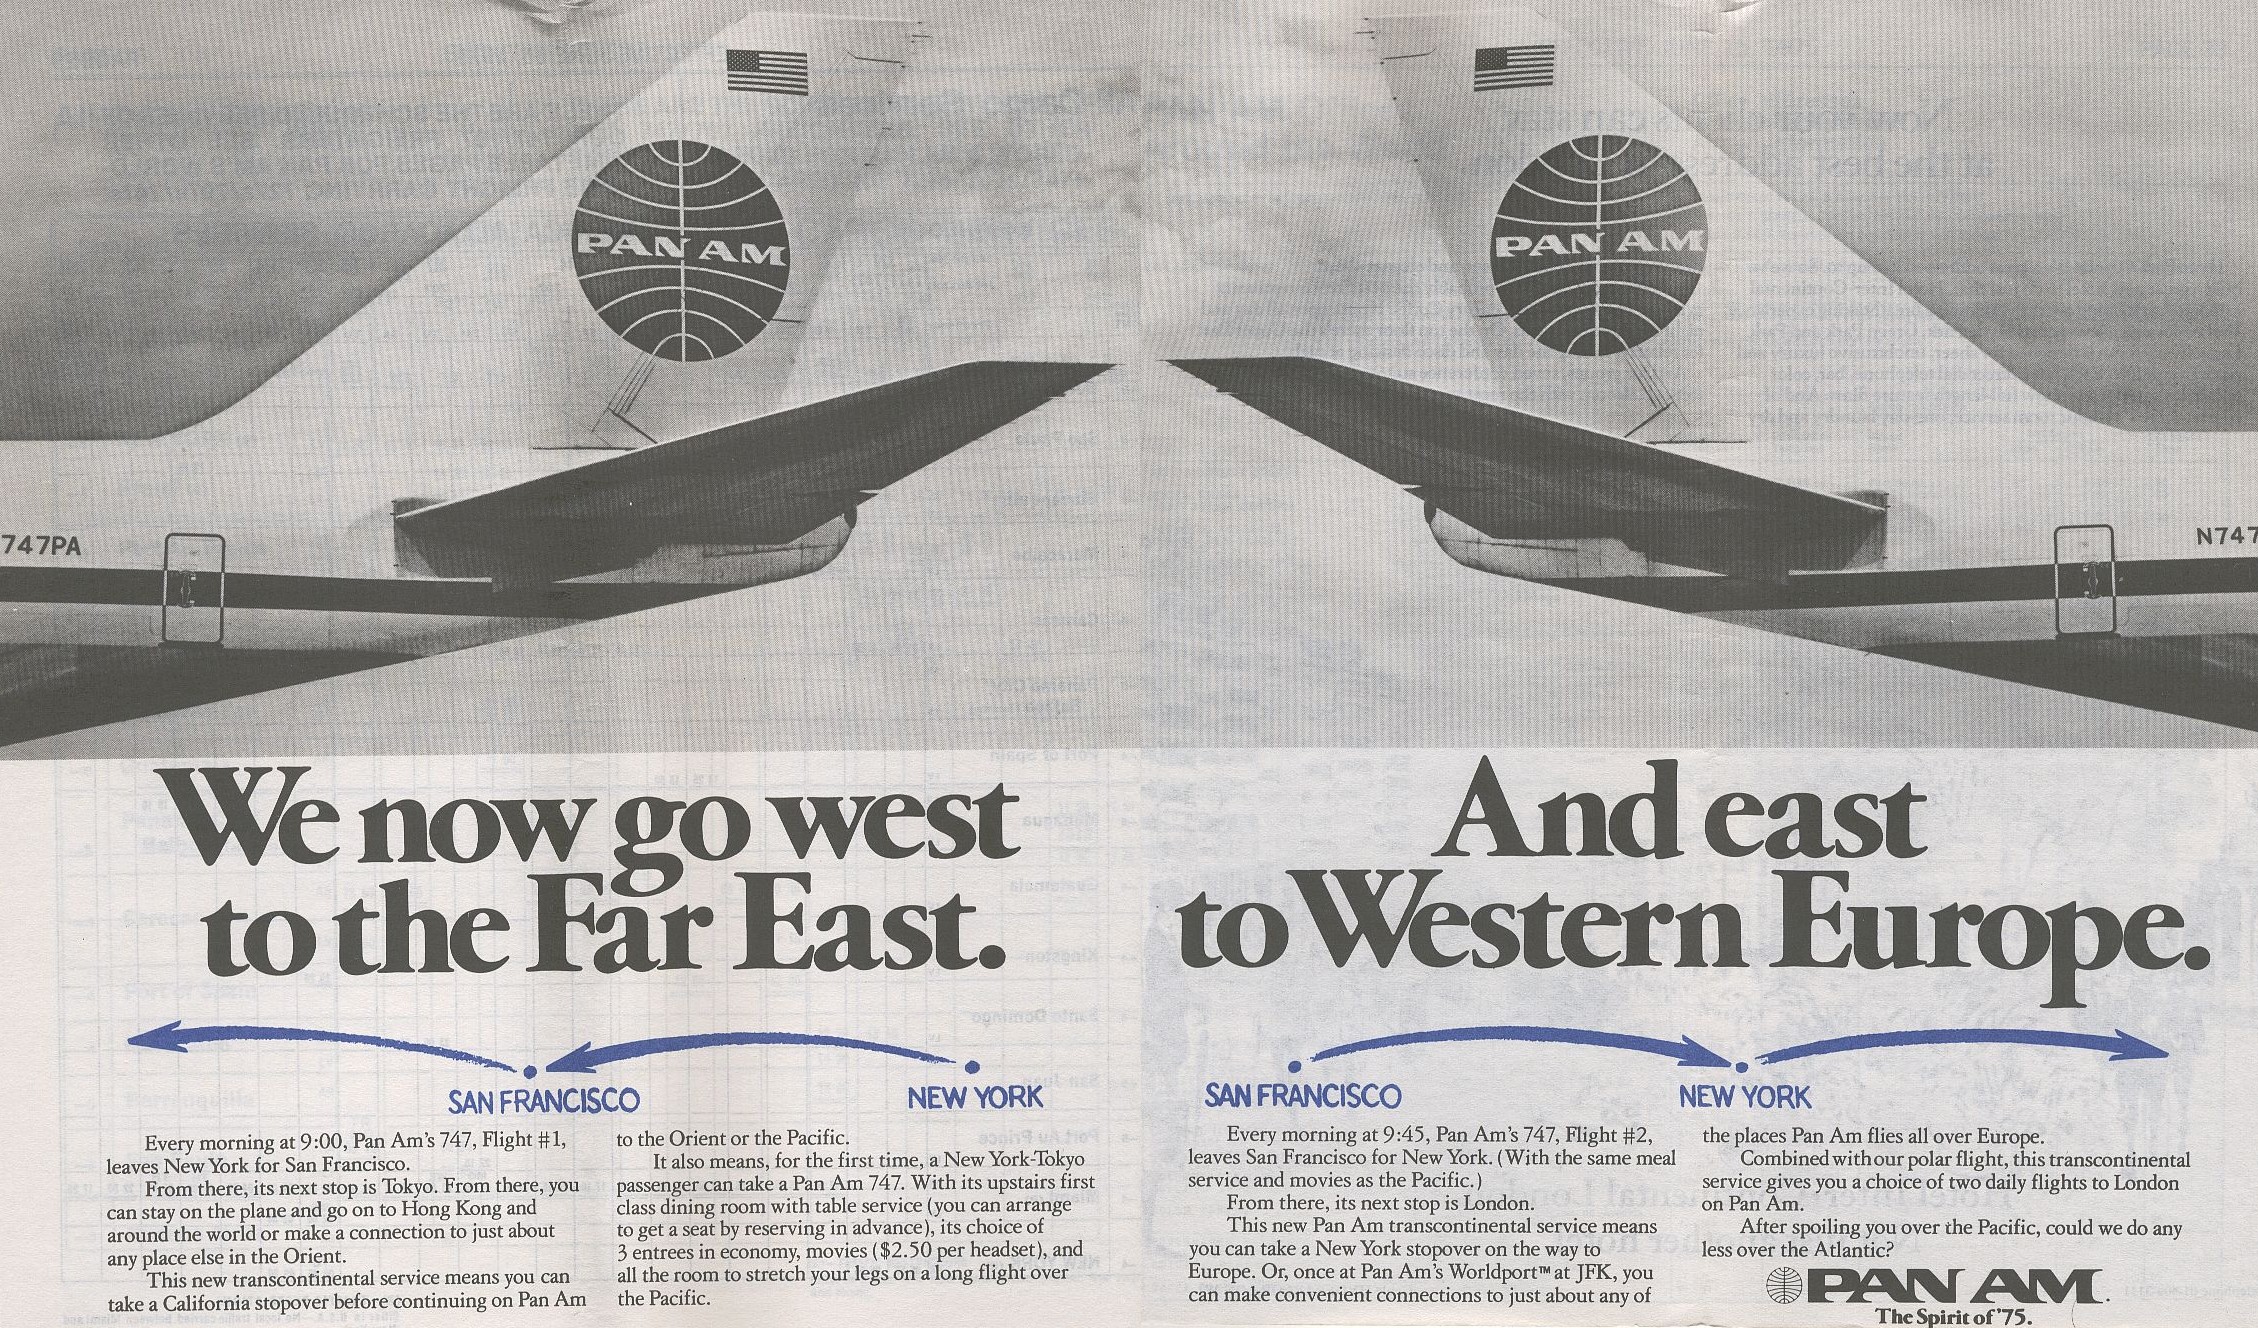 1975, June a Pan Am timetable ad promoting Round the World service.